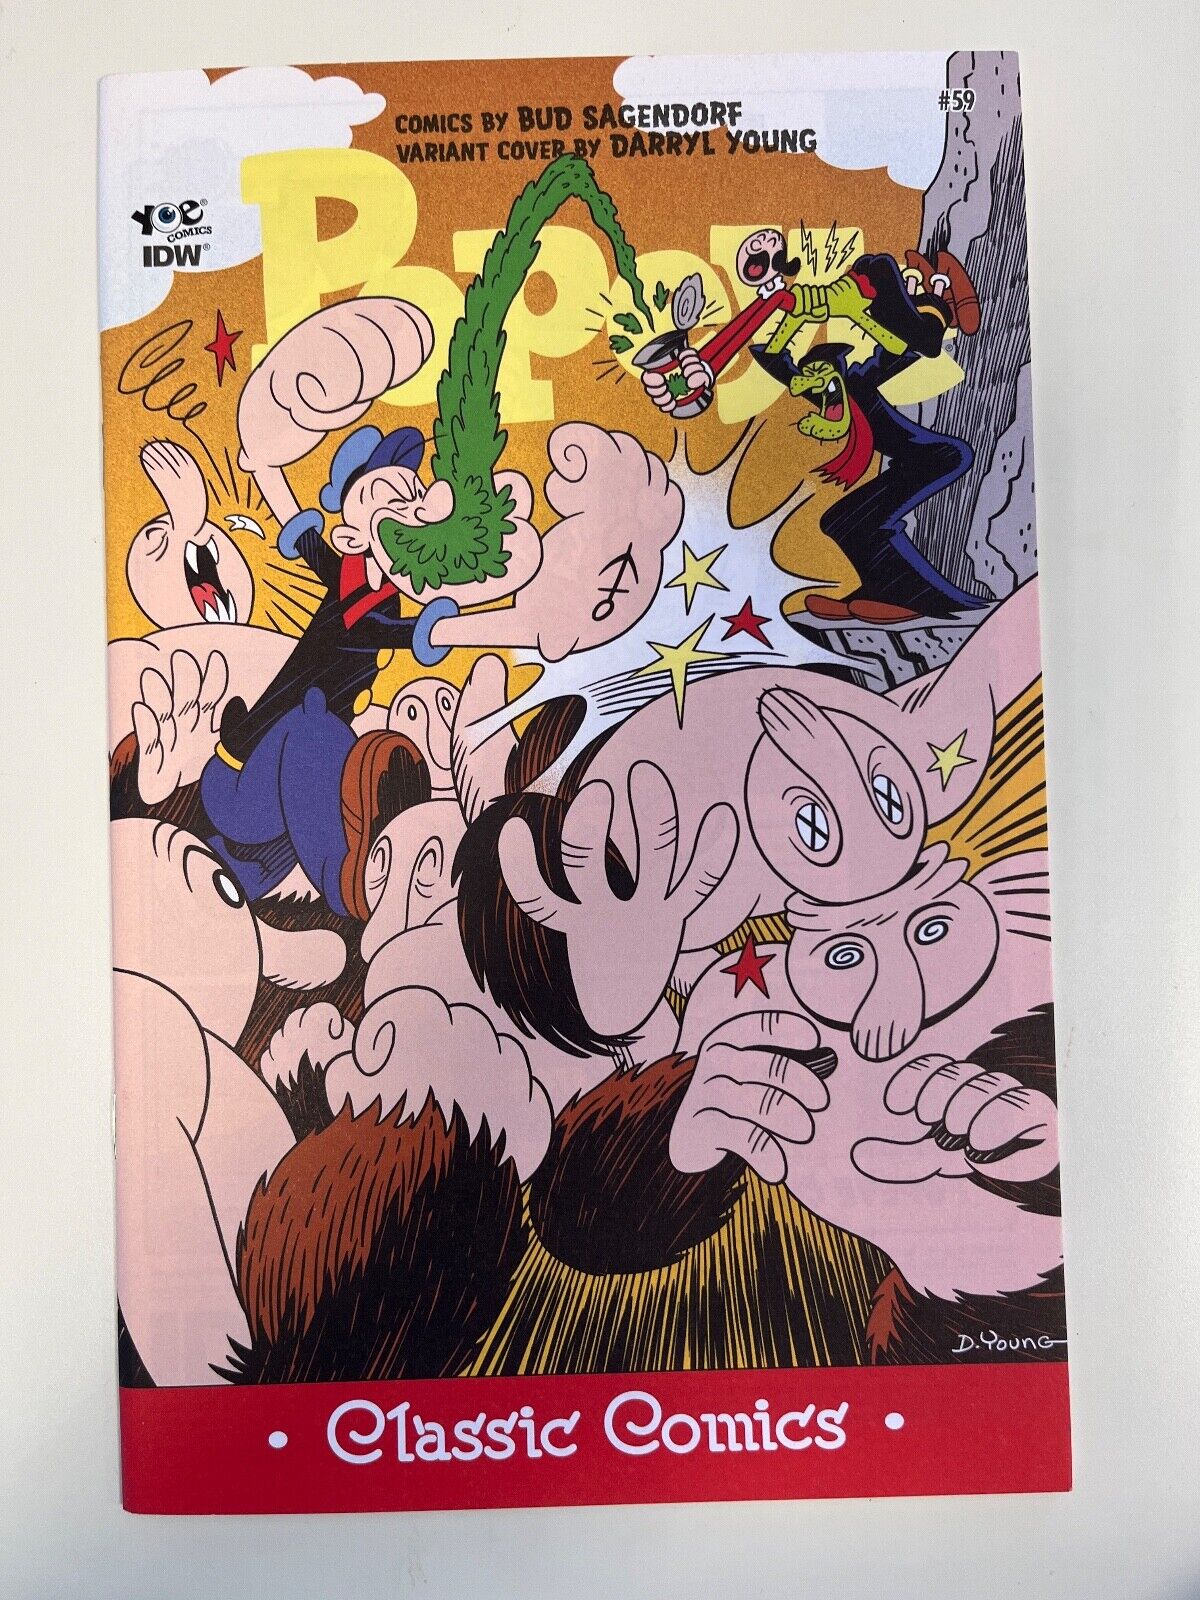 CLASSIC POPEYE #59 : VARIANT COVER by DARRYL YOUNG : IDW